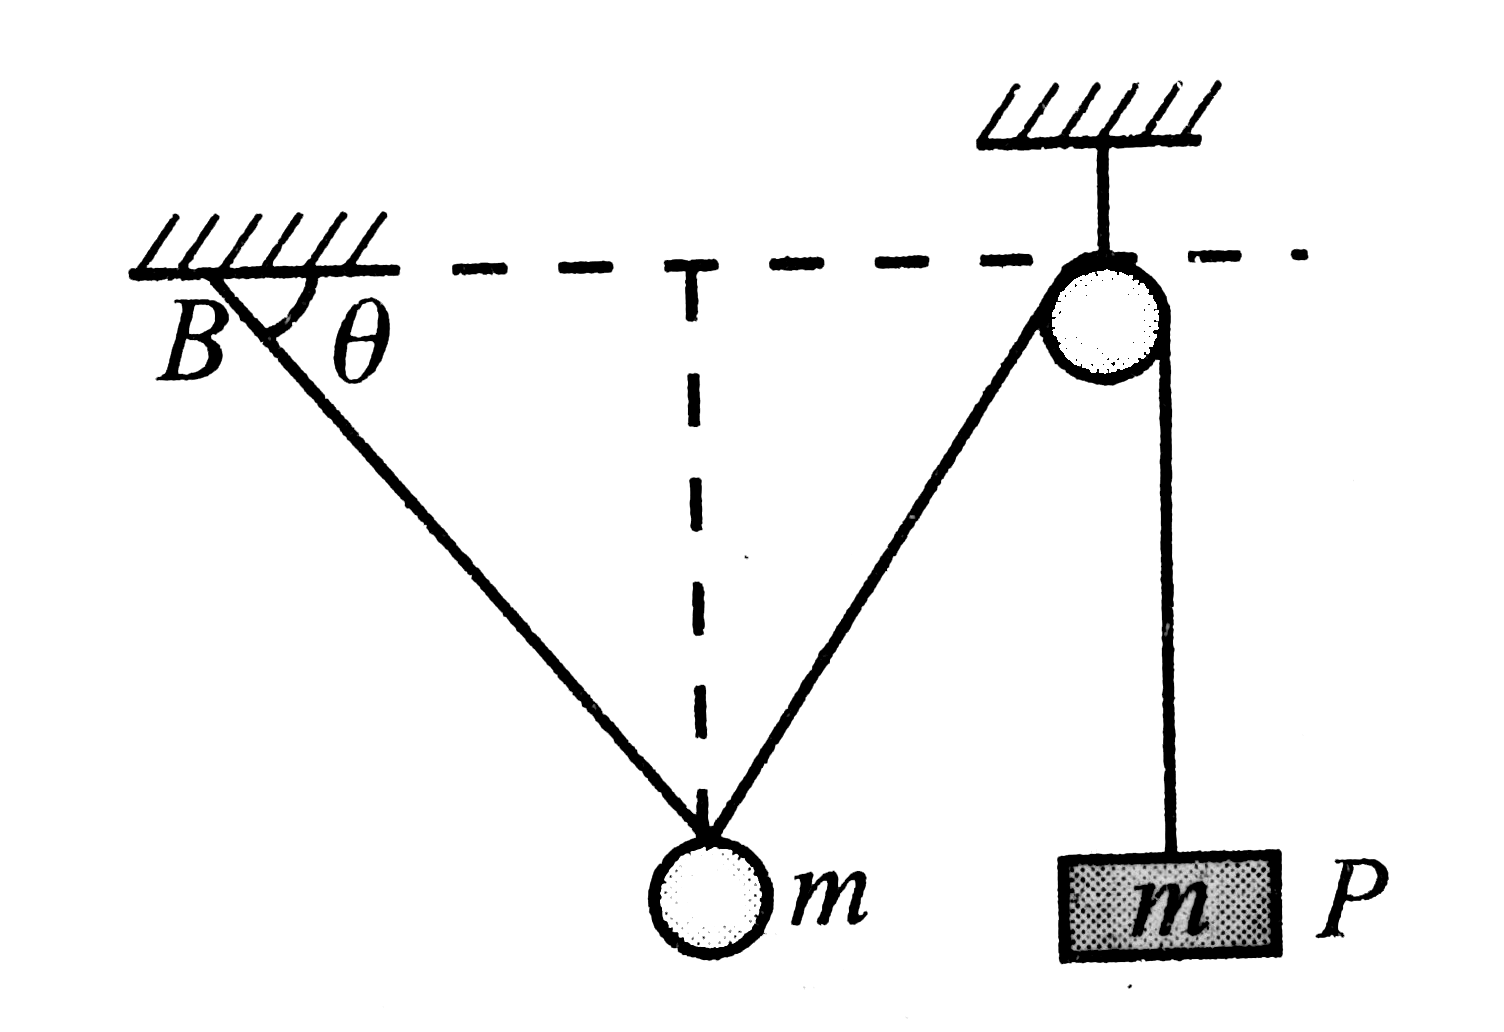 In Fig. a pulley is shown which is frictionless and a ring of mass m can slide on the string without any friction. One end of the string is attached to point B and to the other end, a block 'P' of mass m is attached. The whole system lies in vertical plane.    If block 'C' mentioned above was released from some height and collided with 'P' with some velocity u, then find the velocity of the ring just after the collision. The collision is perfectly inelastic.